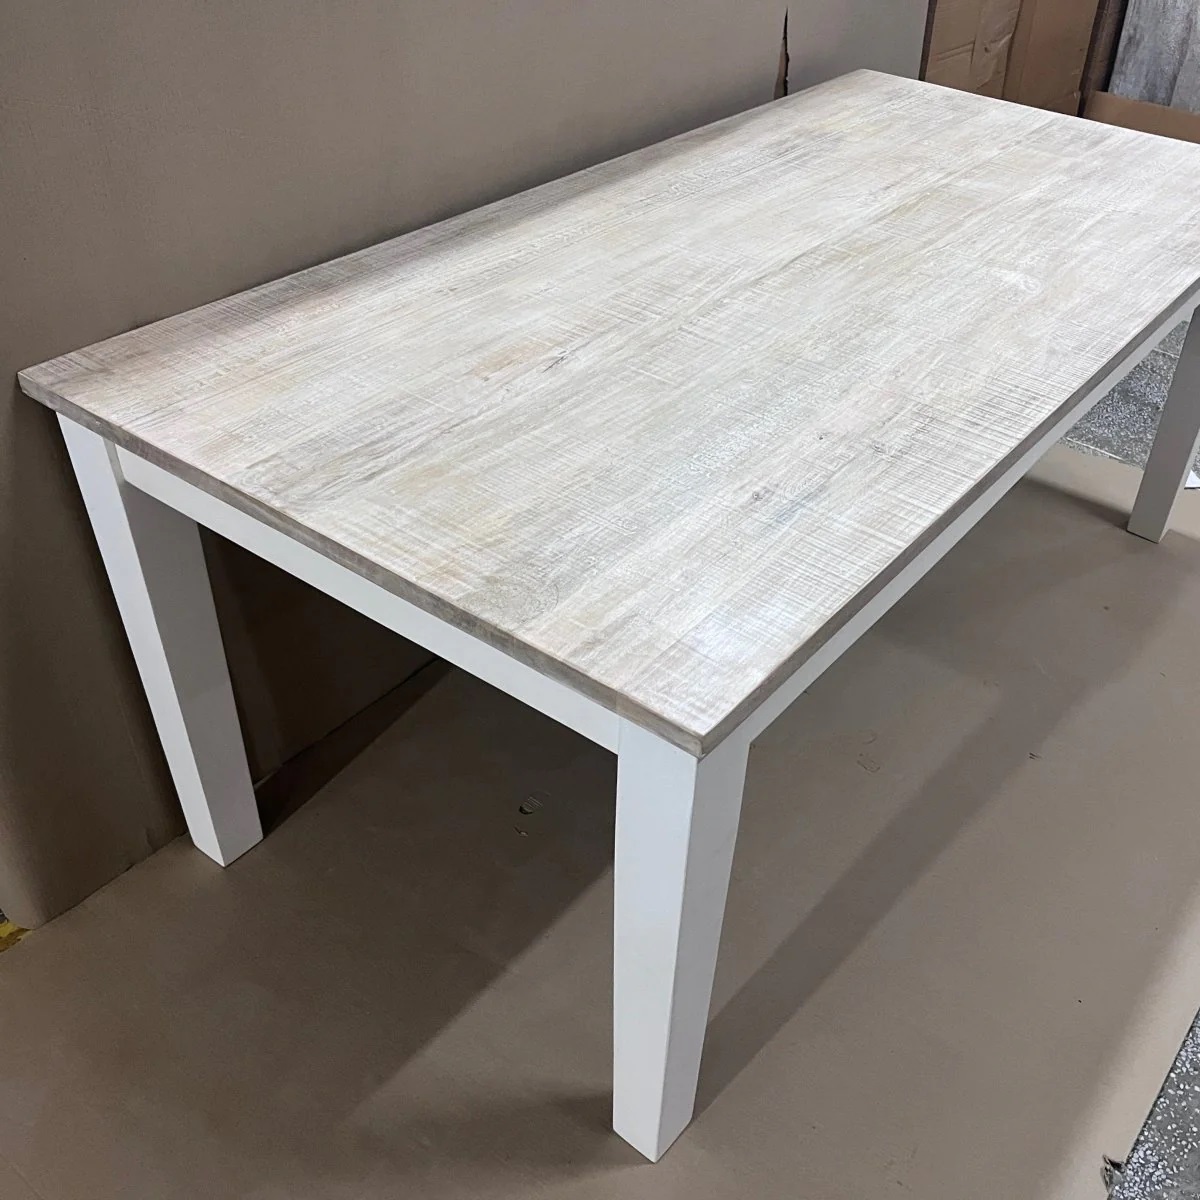 How To Apply Whitewash Finish To A Dining Table